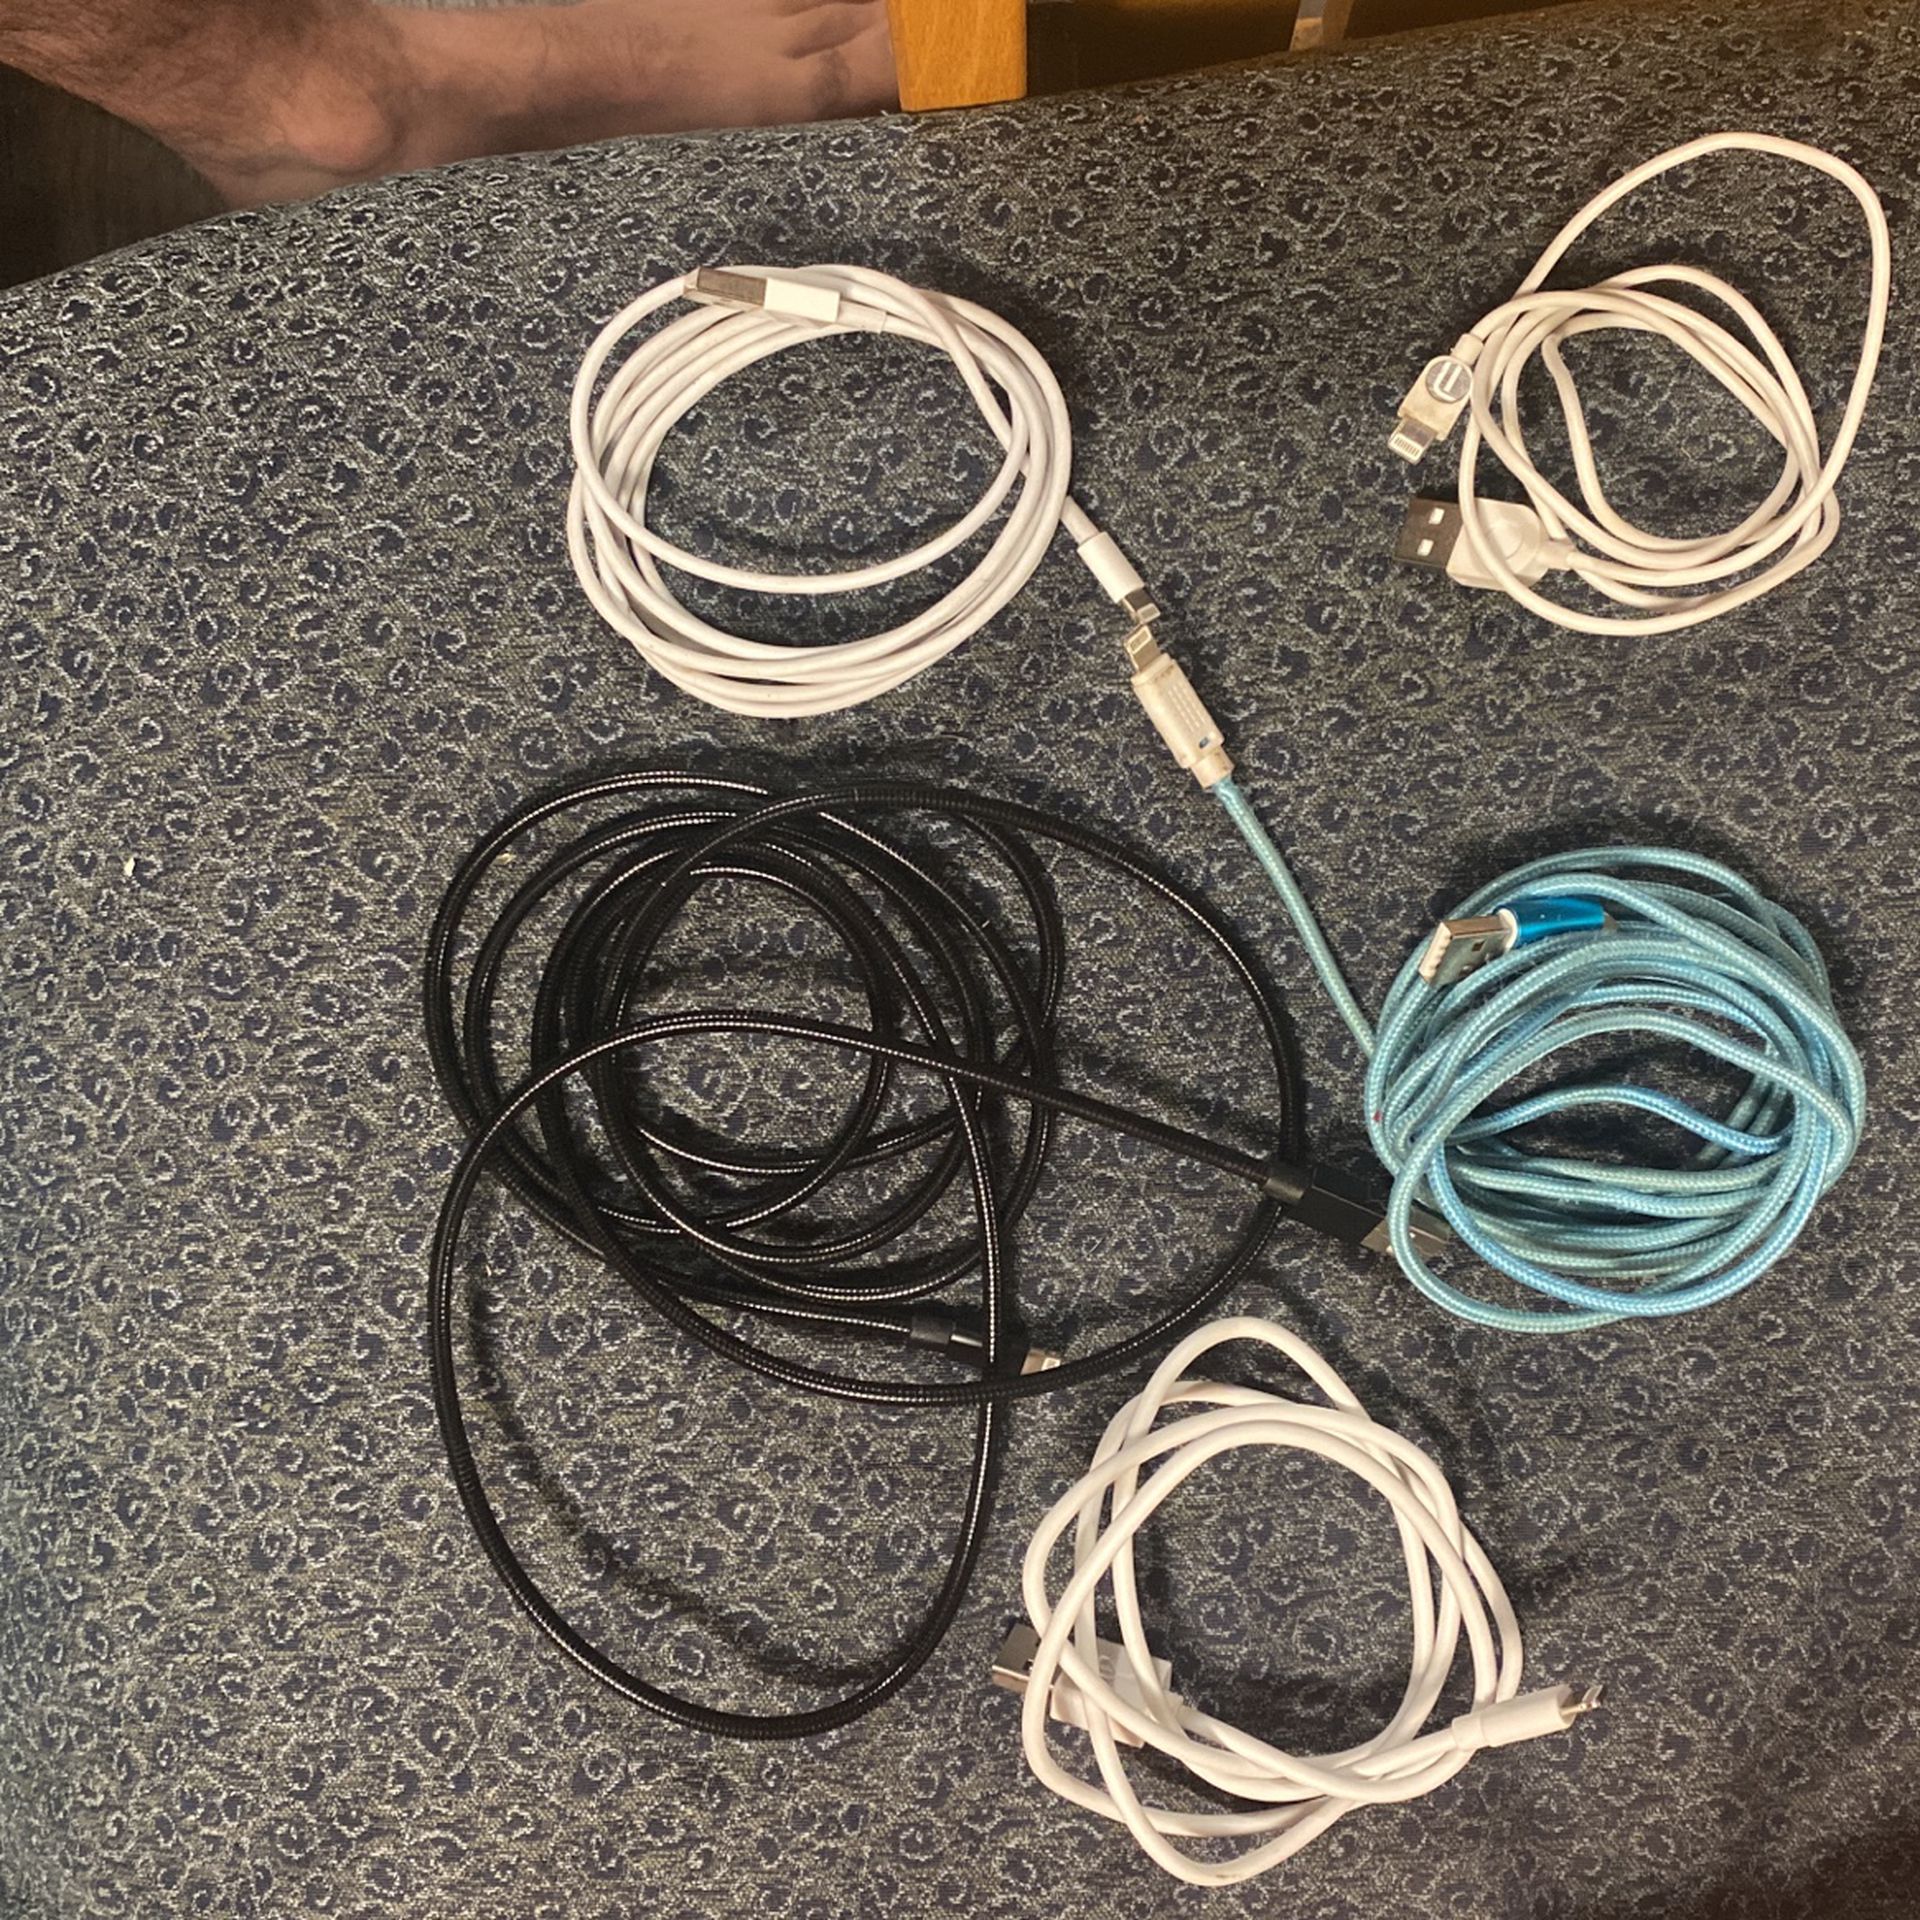 5 iPhone Chargers 